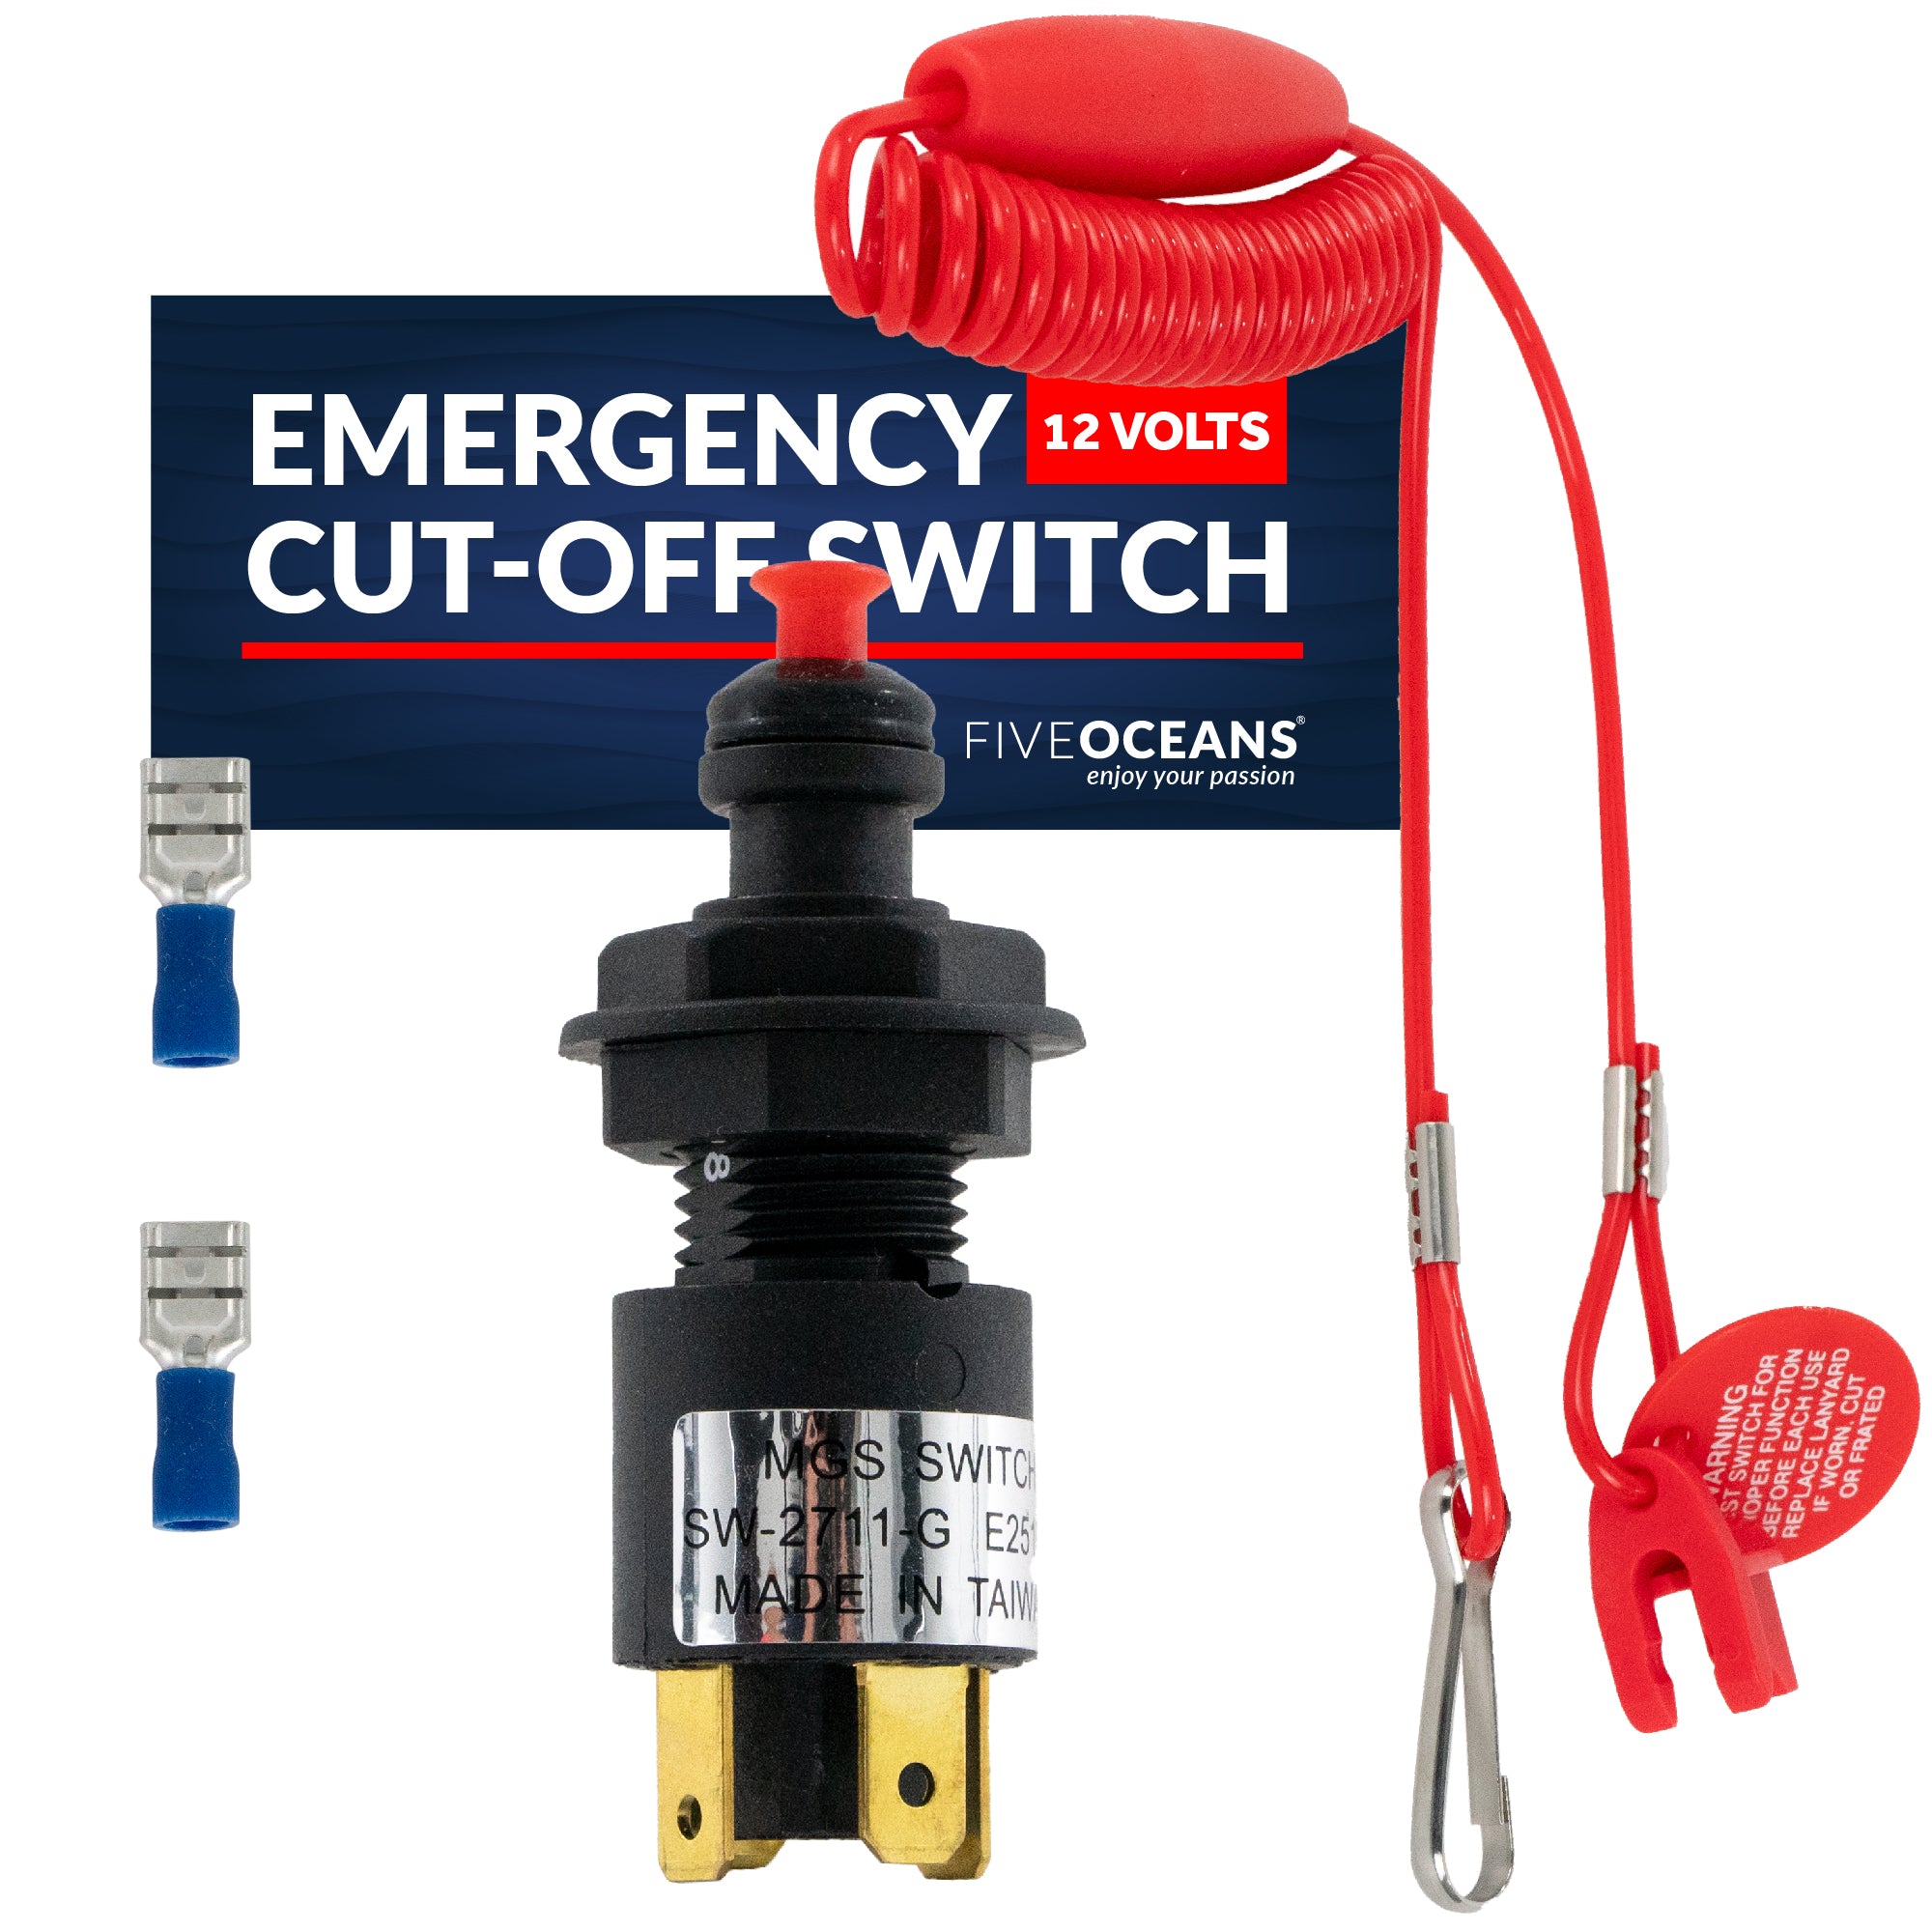 Emergency Cut-Off Switch, 12 Volts - FO1518